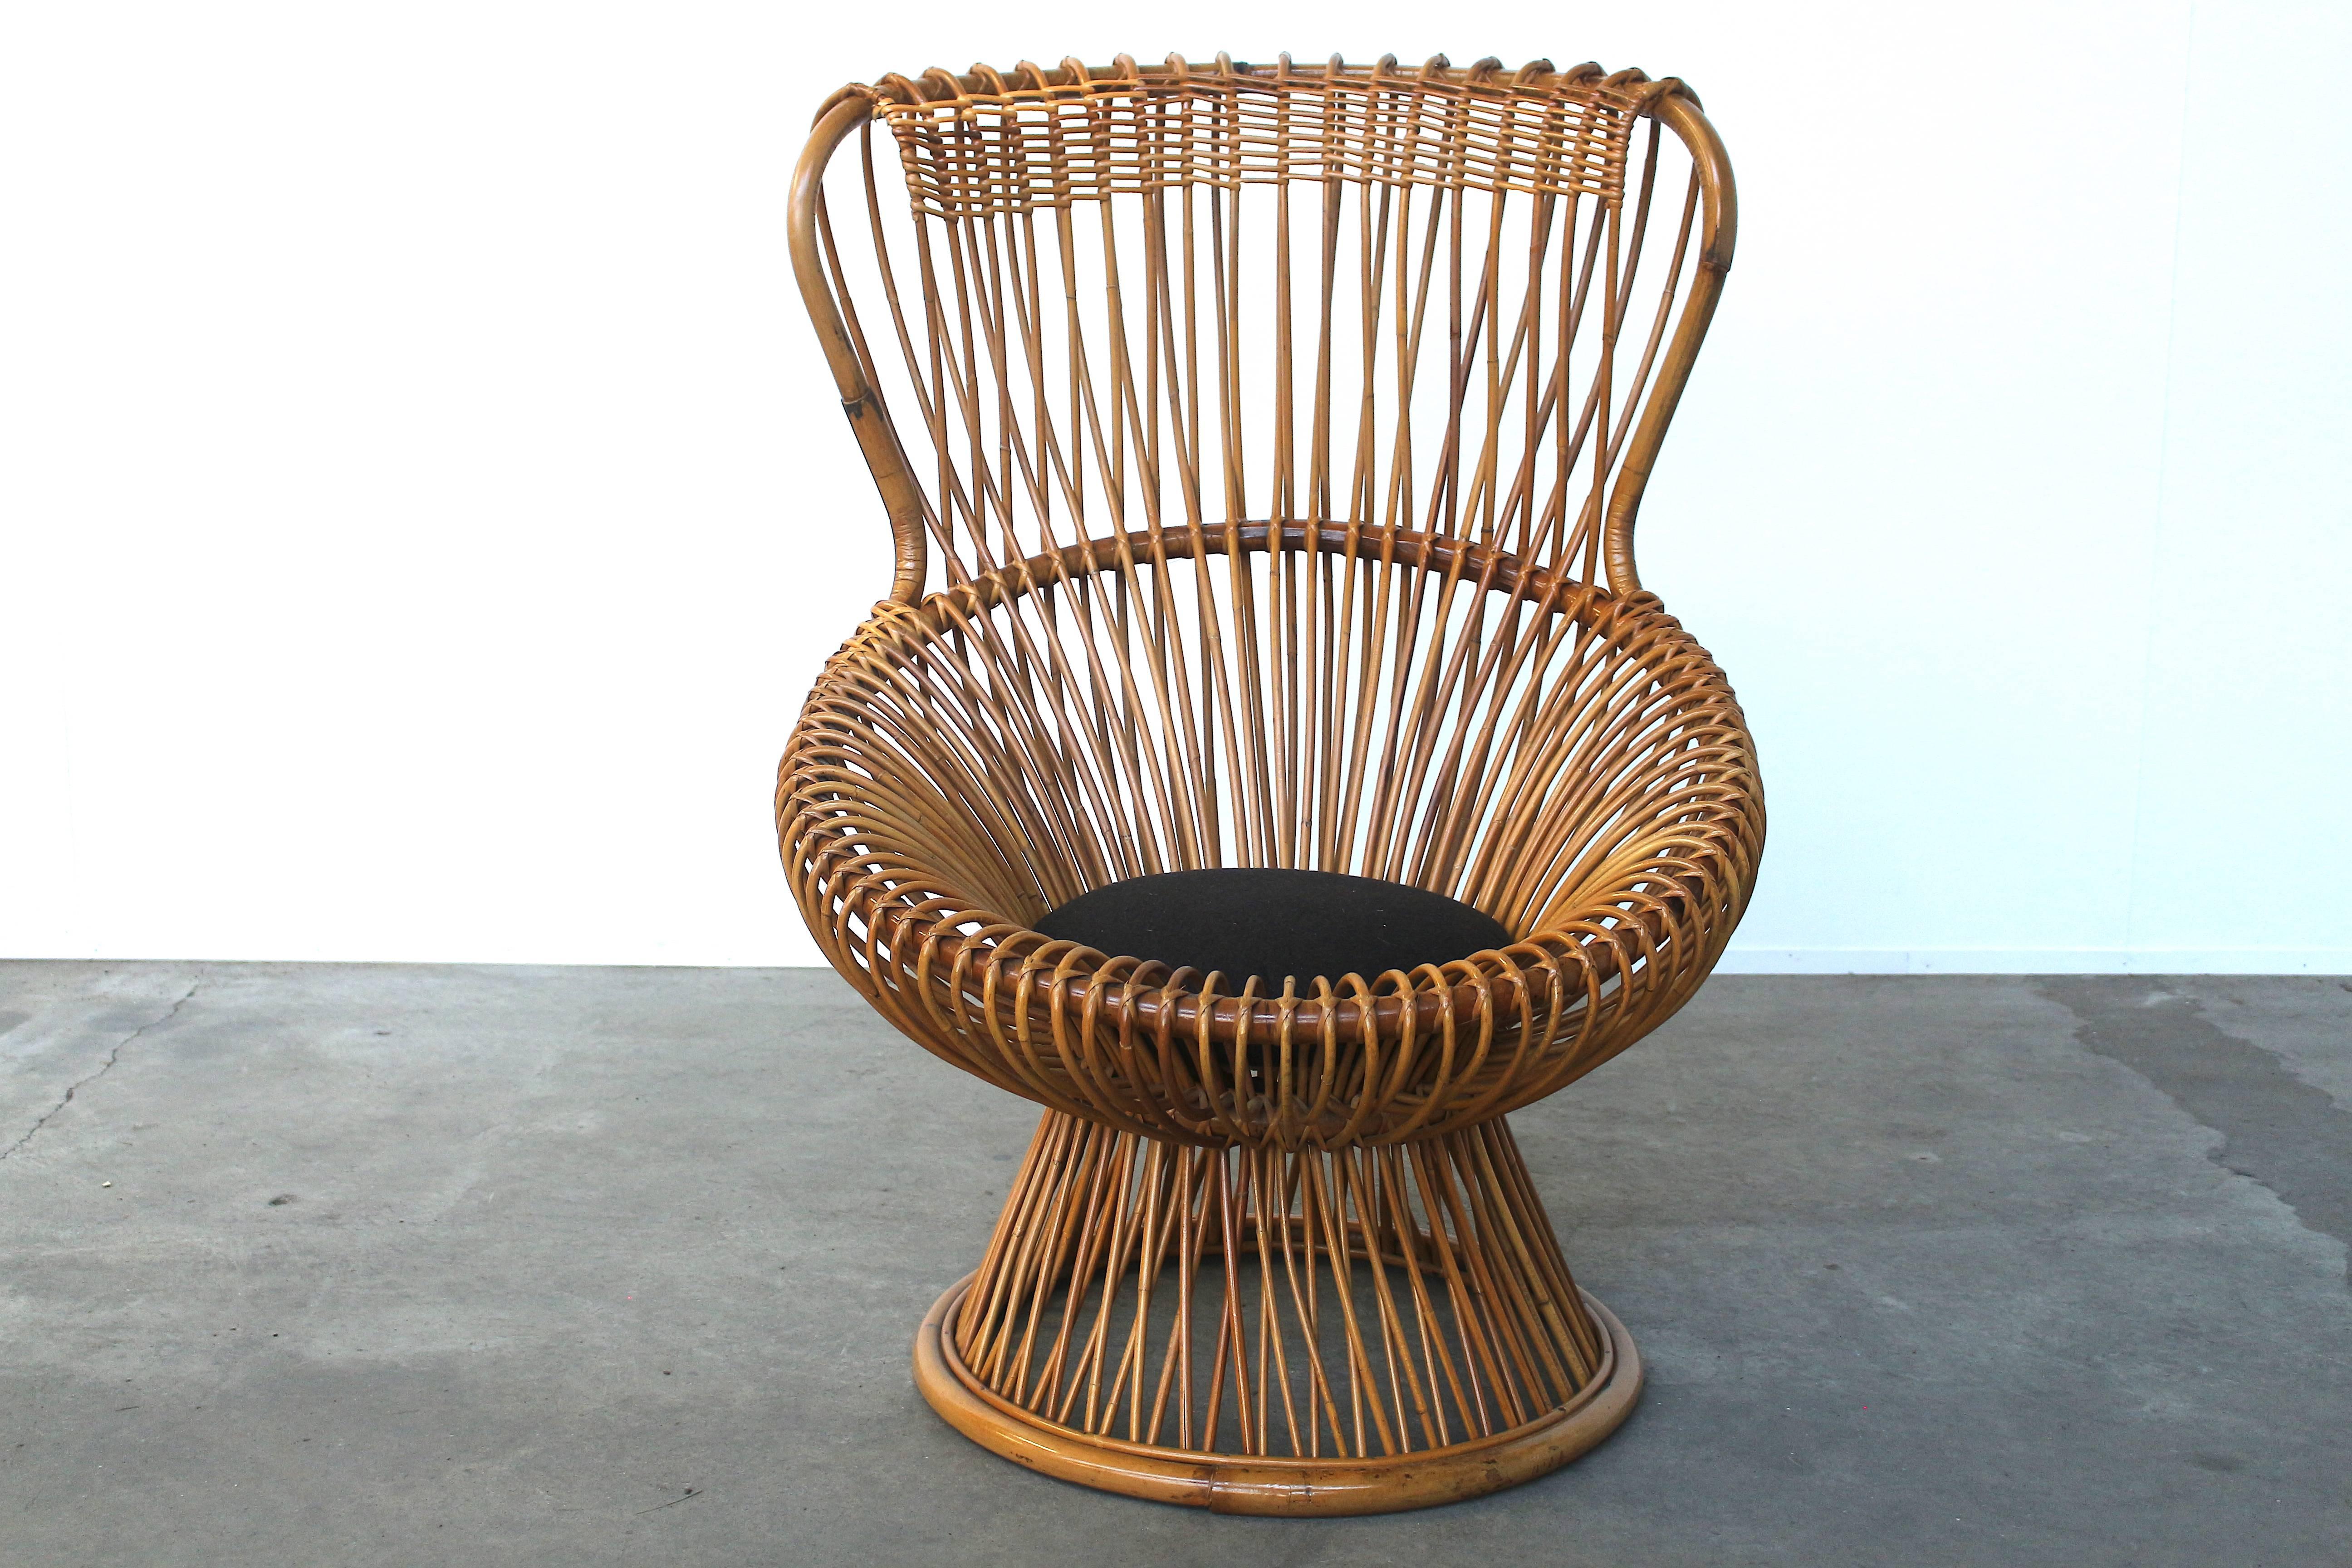 Beautiful wicker chair by Franco Albini, manufactured by Bonacina. All the wicker and rattan is in absolutely wonderful condition, no flaws or damages whatsoever. It is also professionally treated against the weather, so is suitable for outdoor use.